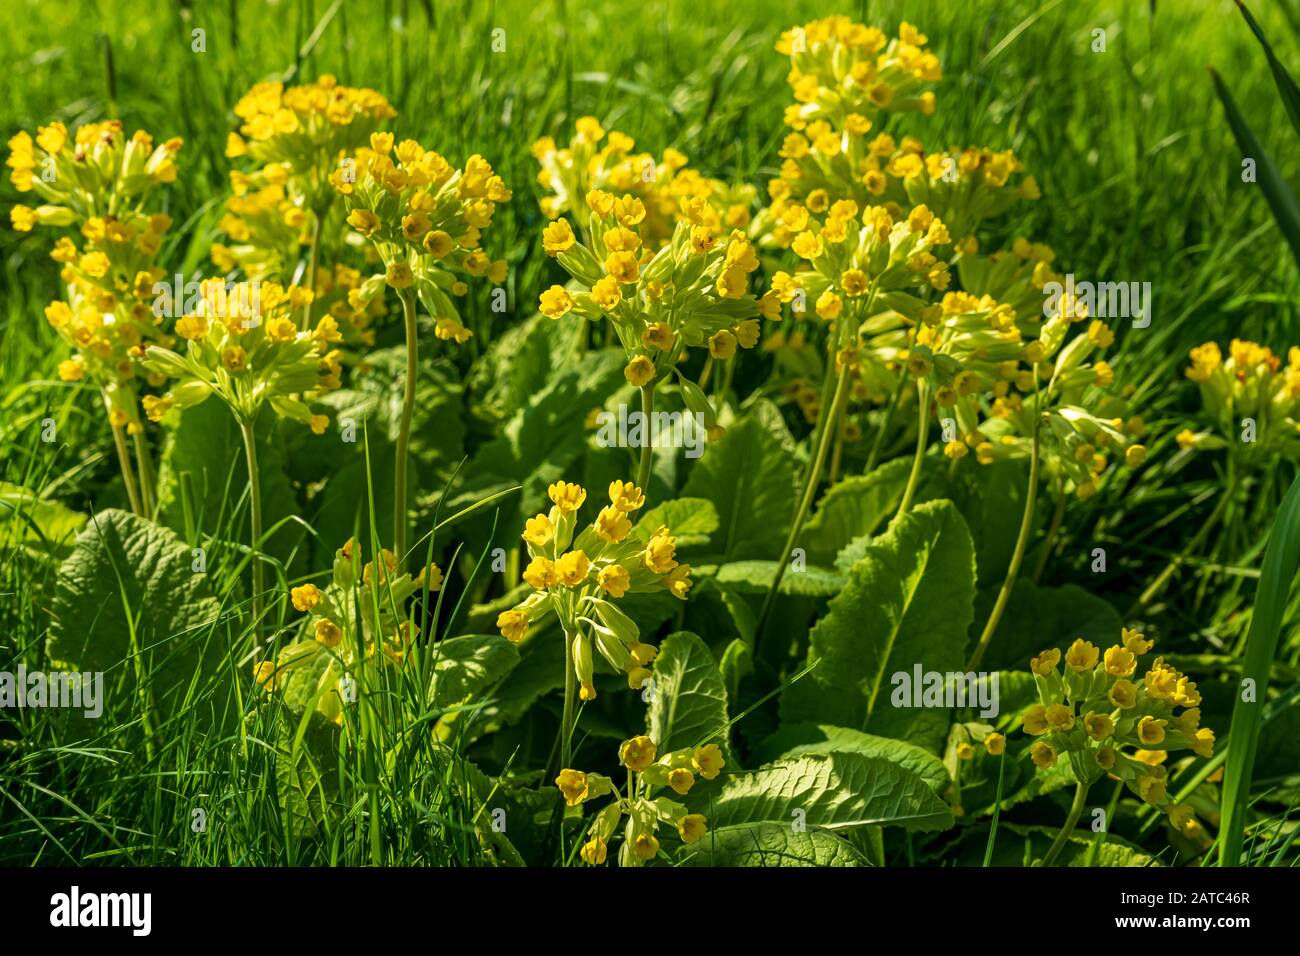 Primula veris, or cowslips, growing in grass in dappled spring sunlight, showing both yellow umbels and crinkly leaves Stock Photo